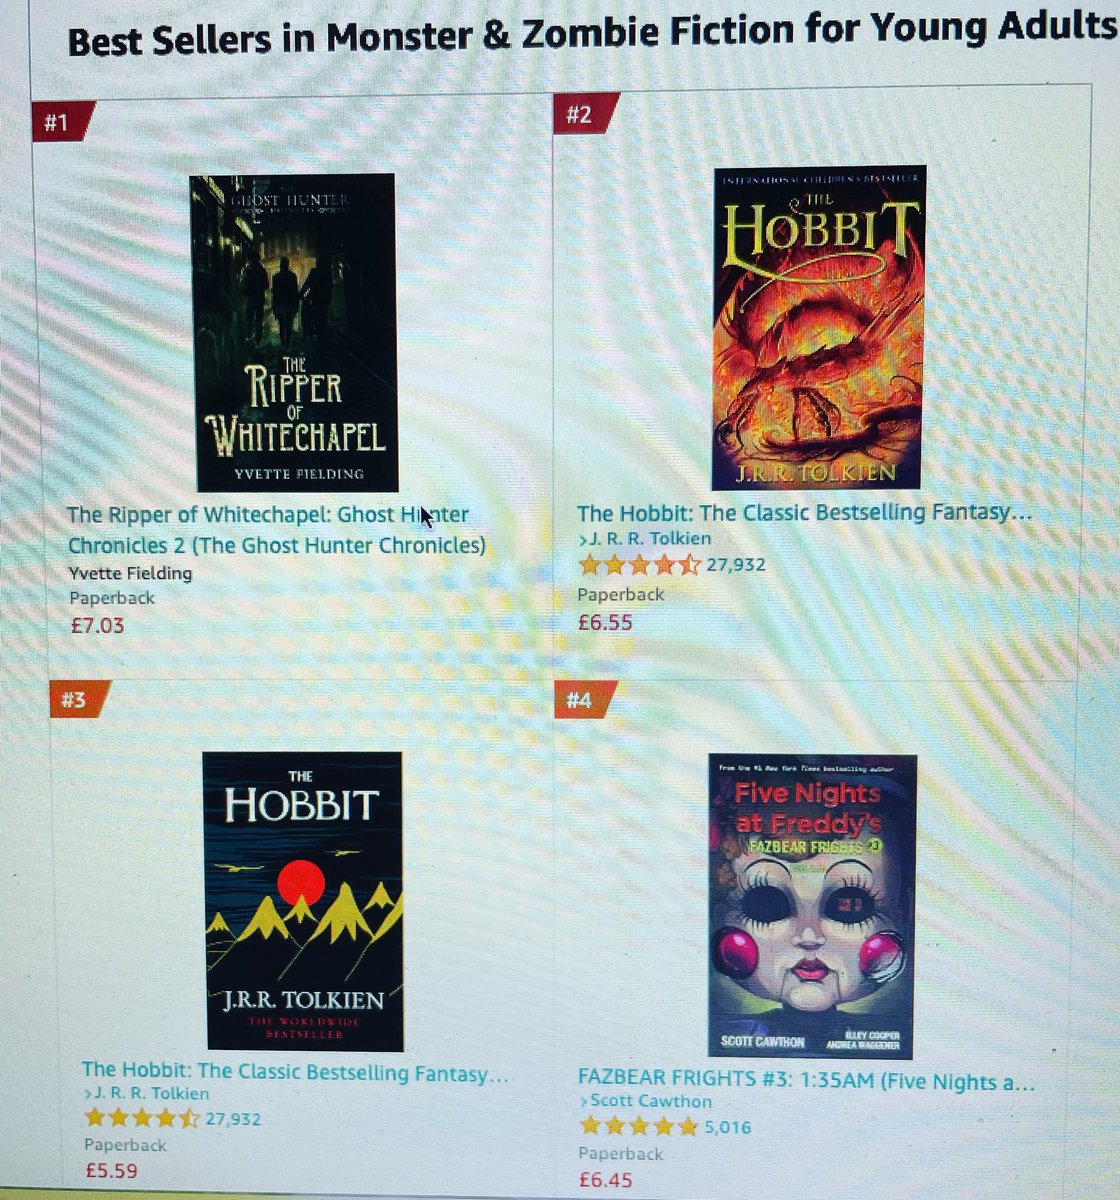 Very #excited to see my new instalment of #theghosthunterchronicles #Theripperofwhitechapel is #no1 and what #greatcompany to be with? #thankyou to everyone that has #preordered I hope you #enjoy #spooky #paranormal #ghosts #ghosthunting #newbooks